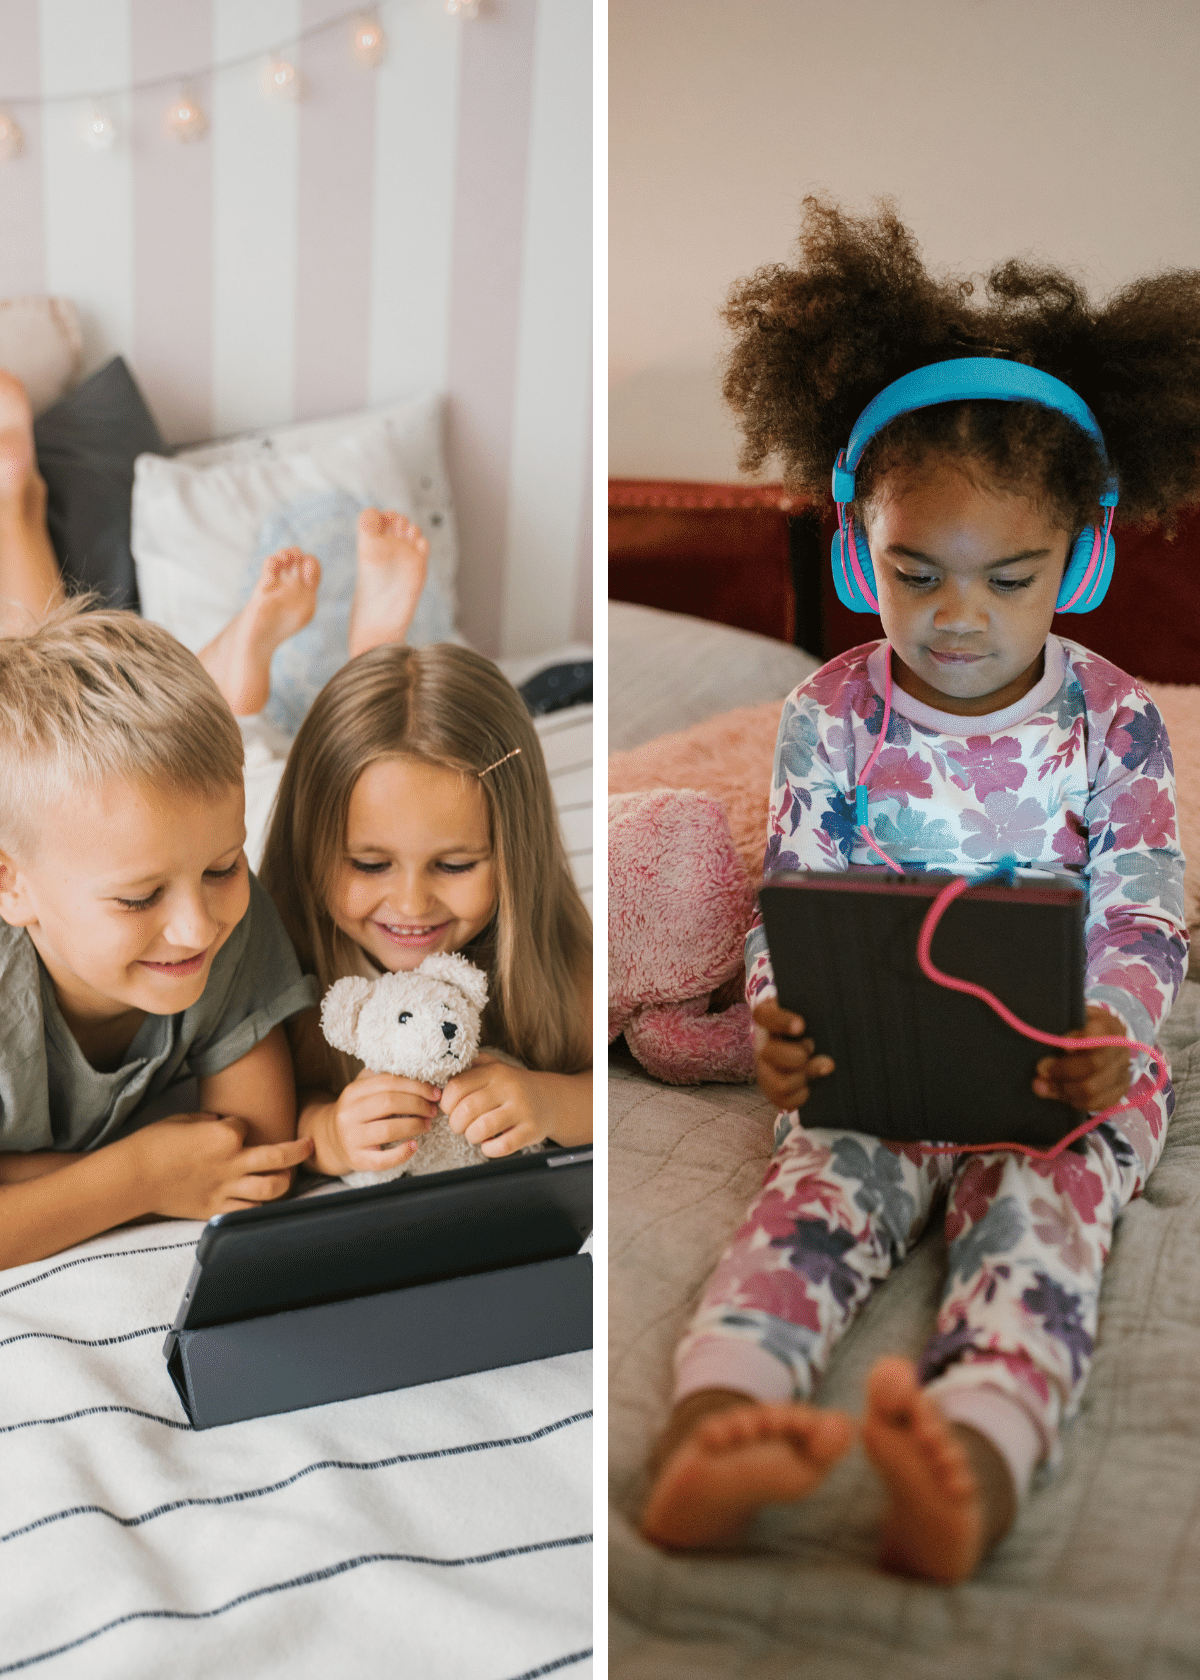 The 6 Best iPad Cases for Kids To Protect Their Devices!